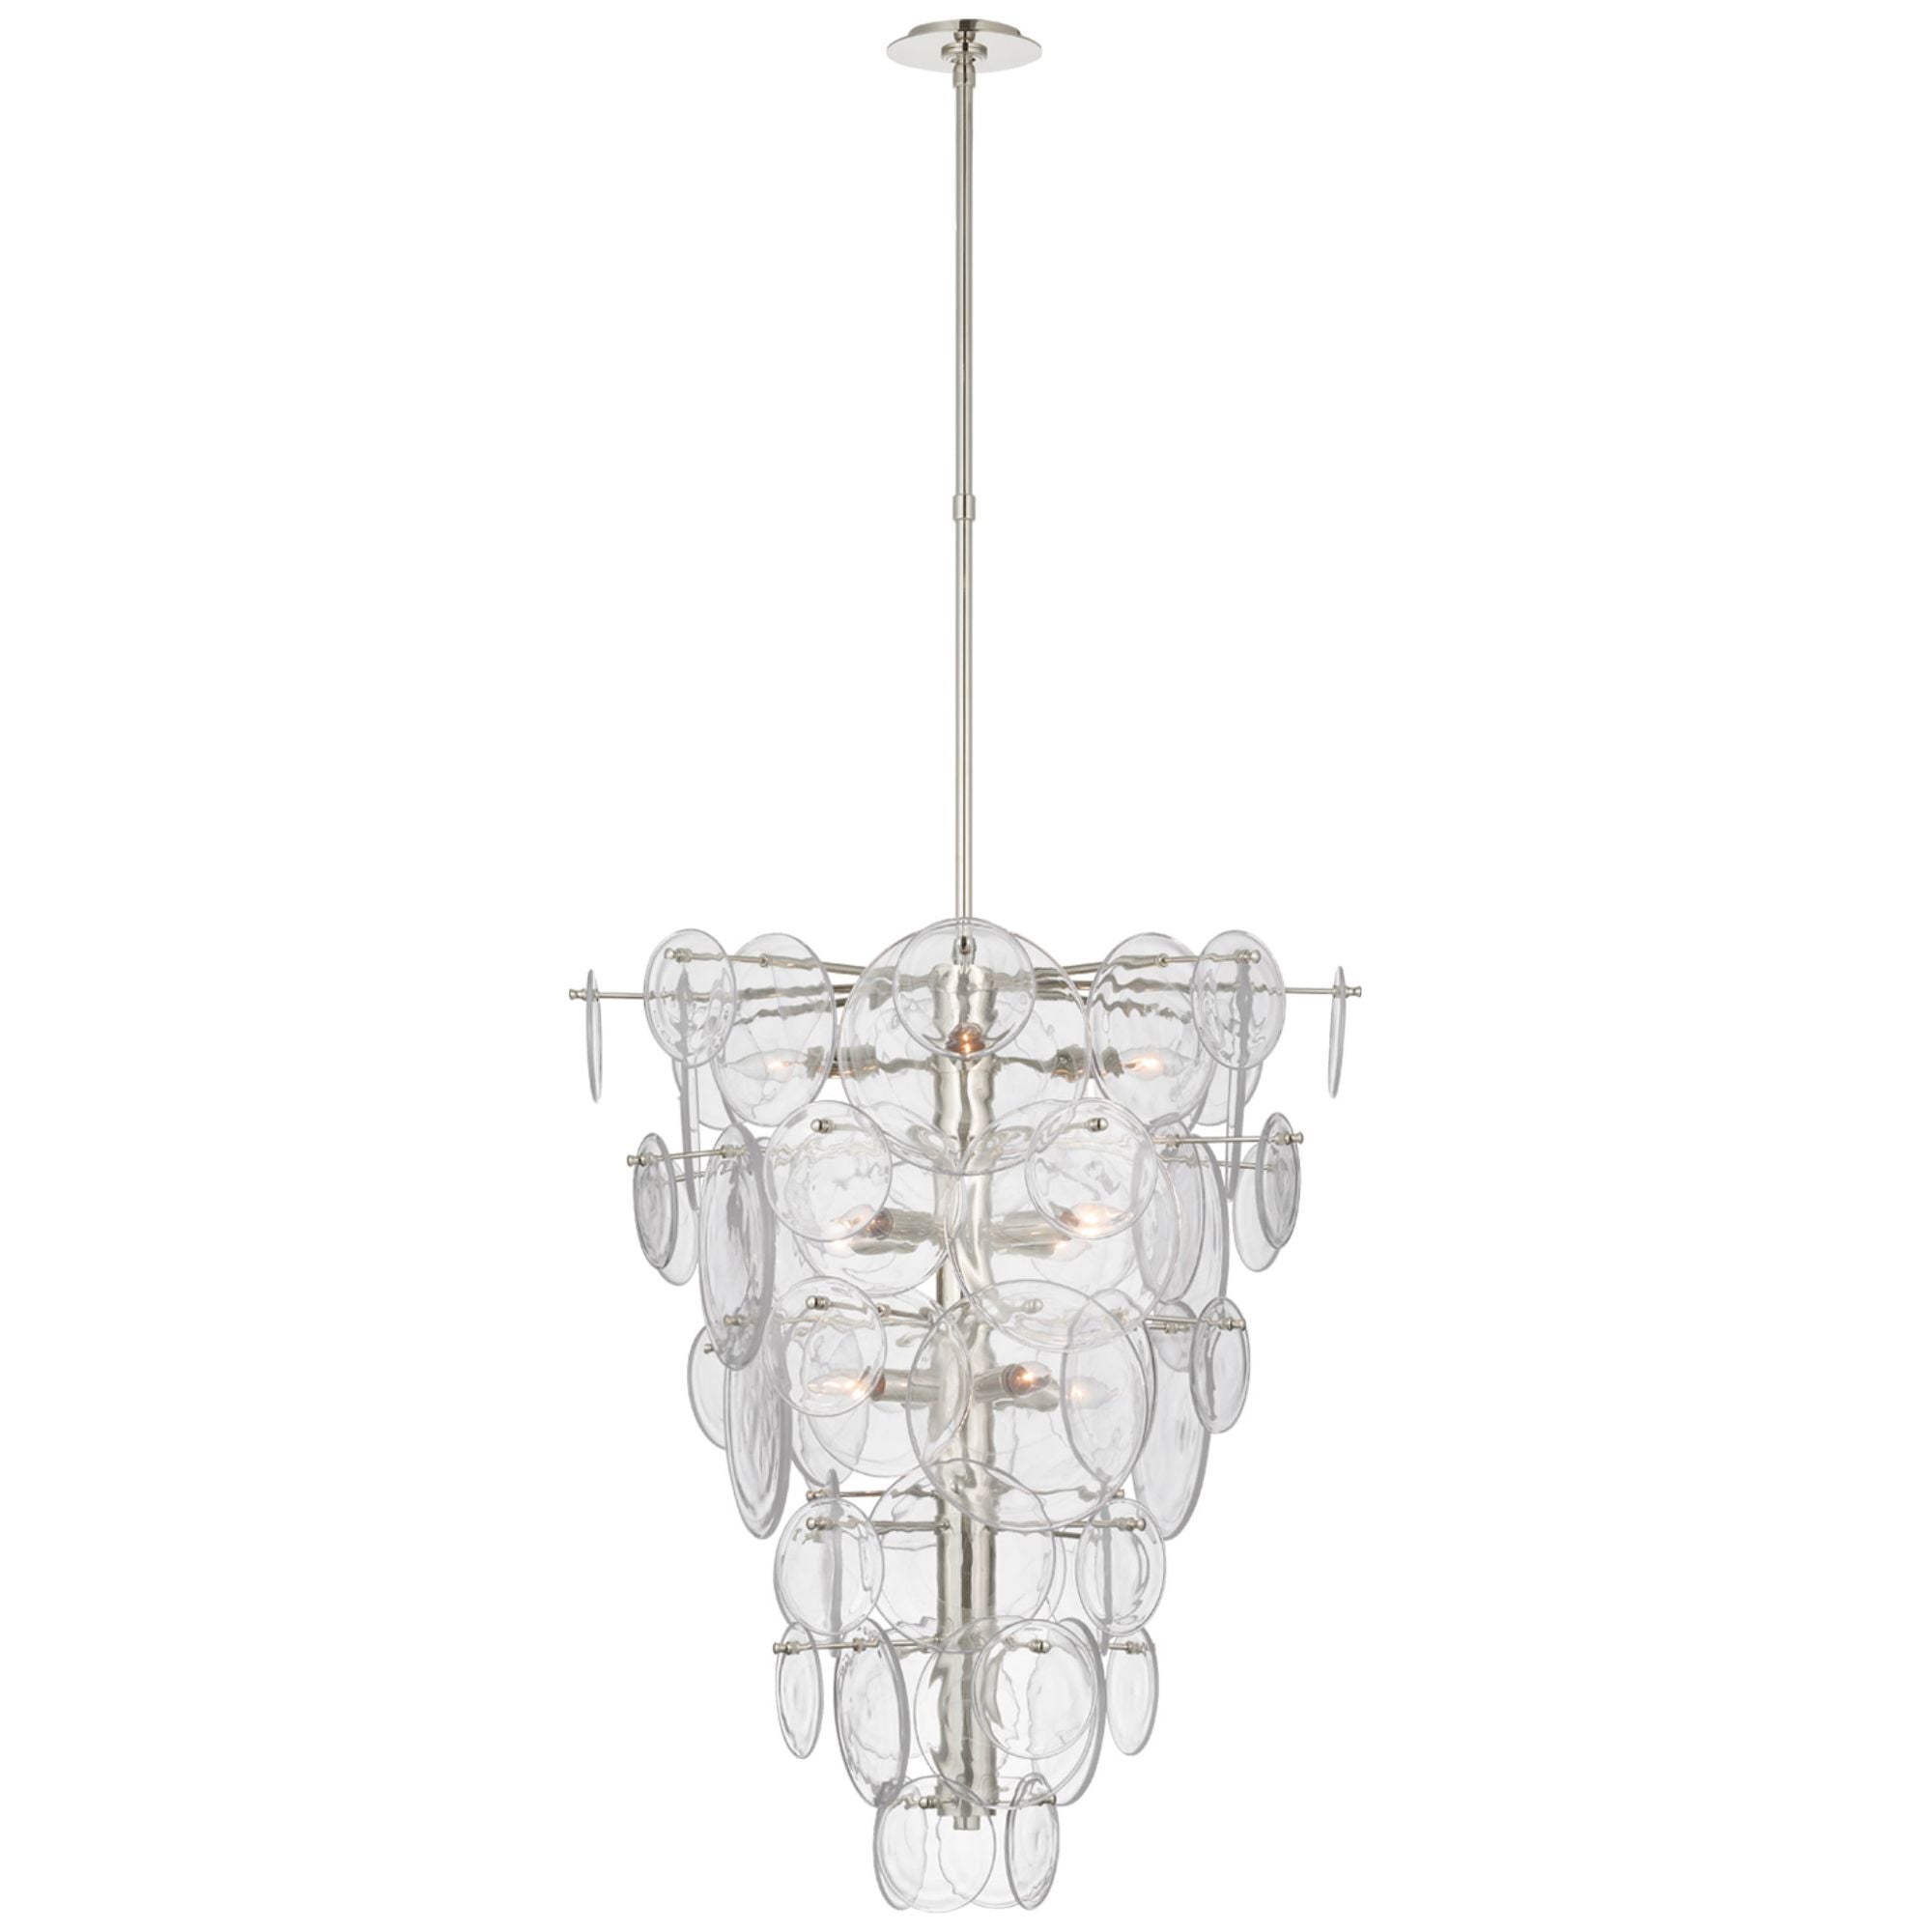 AERIN Loire Cascading Chandelier in Polished Nickel with Clear Strie Glass